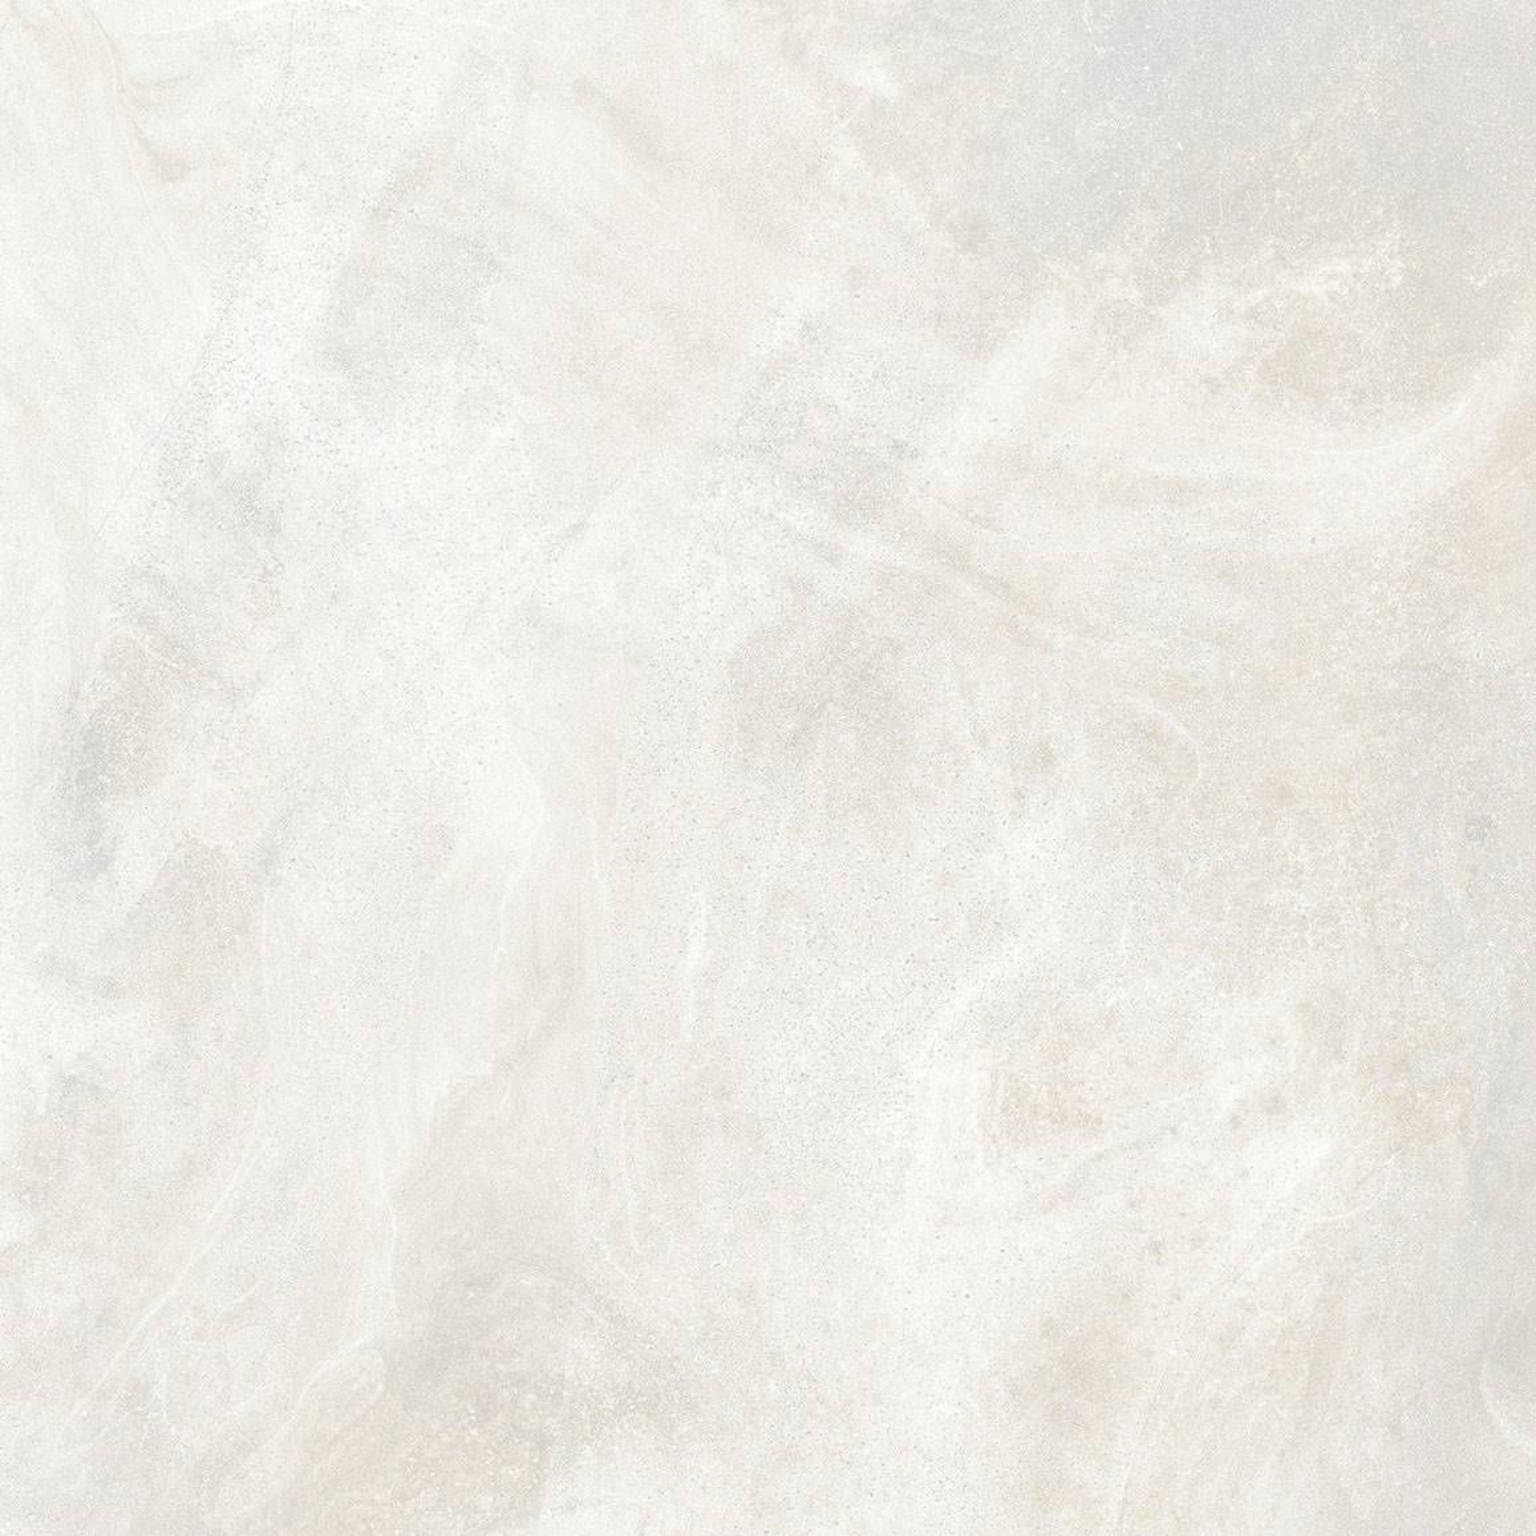 Nilo White Polished | Stones & More | Finest selection of Mosaics, Glass, Tile and Stone